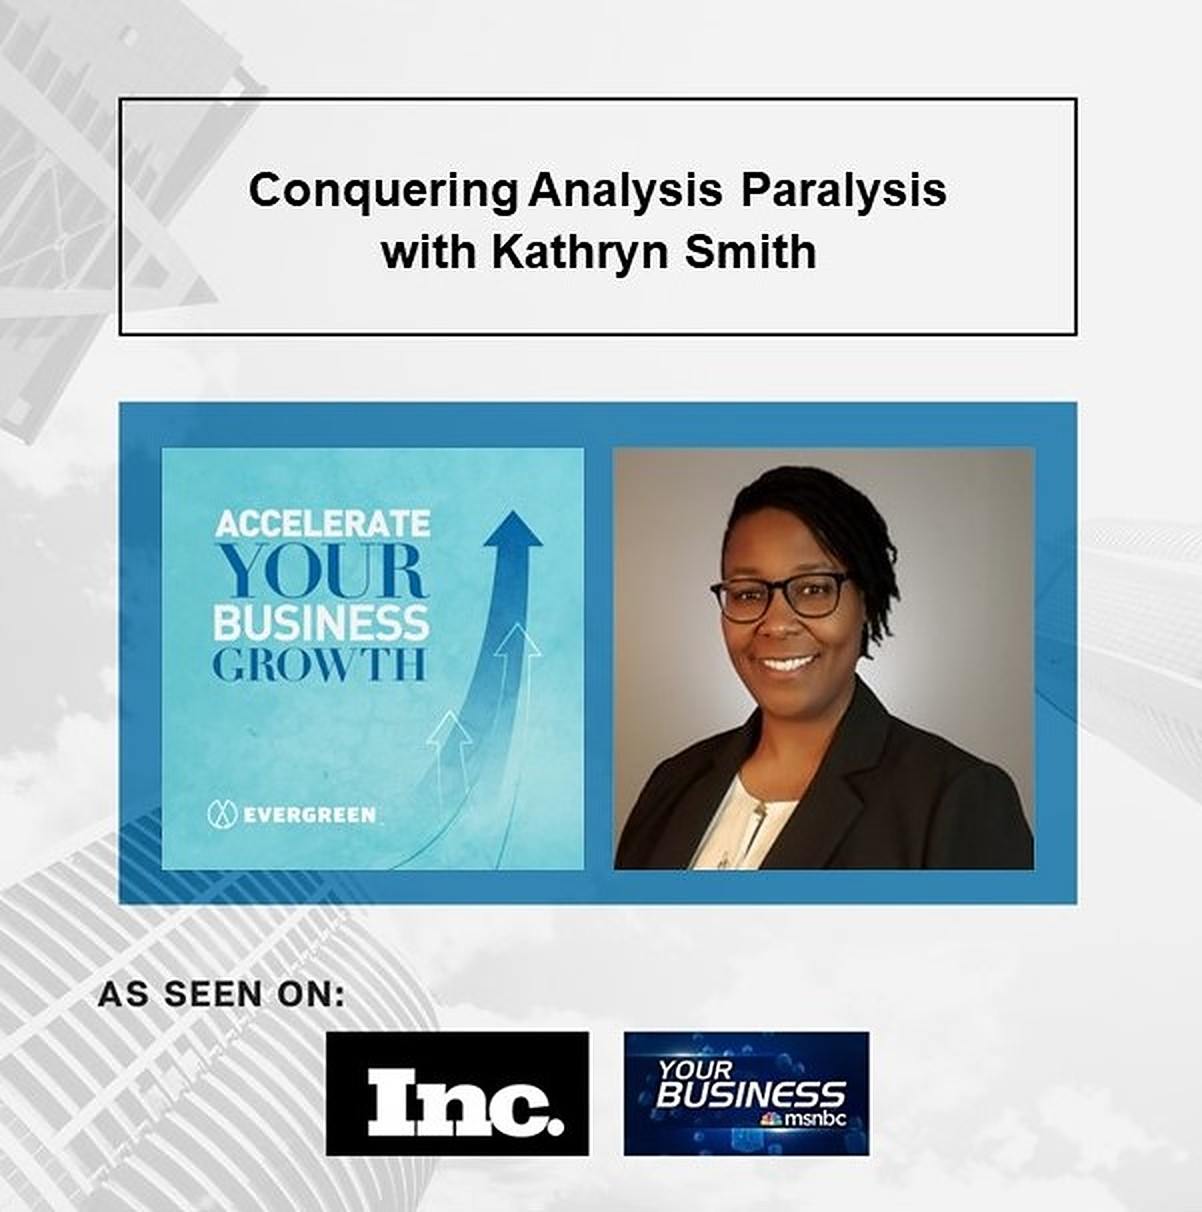 Conquering Analysis Paralysis with Kathryn Smith